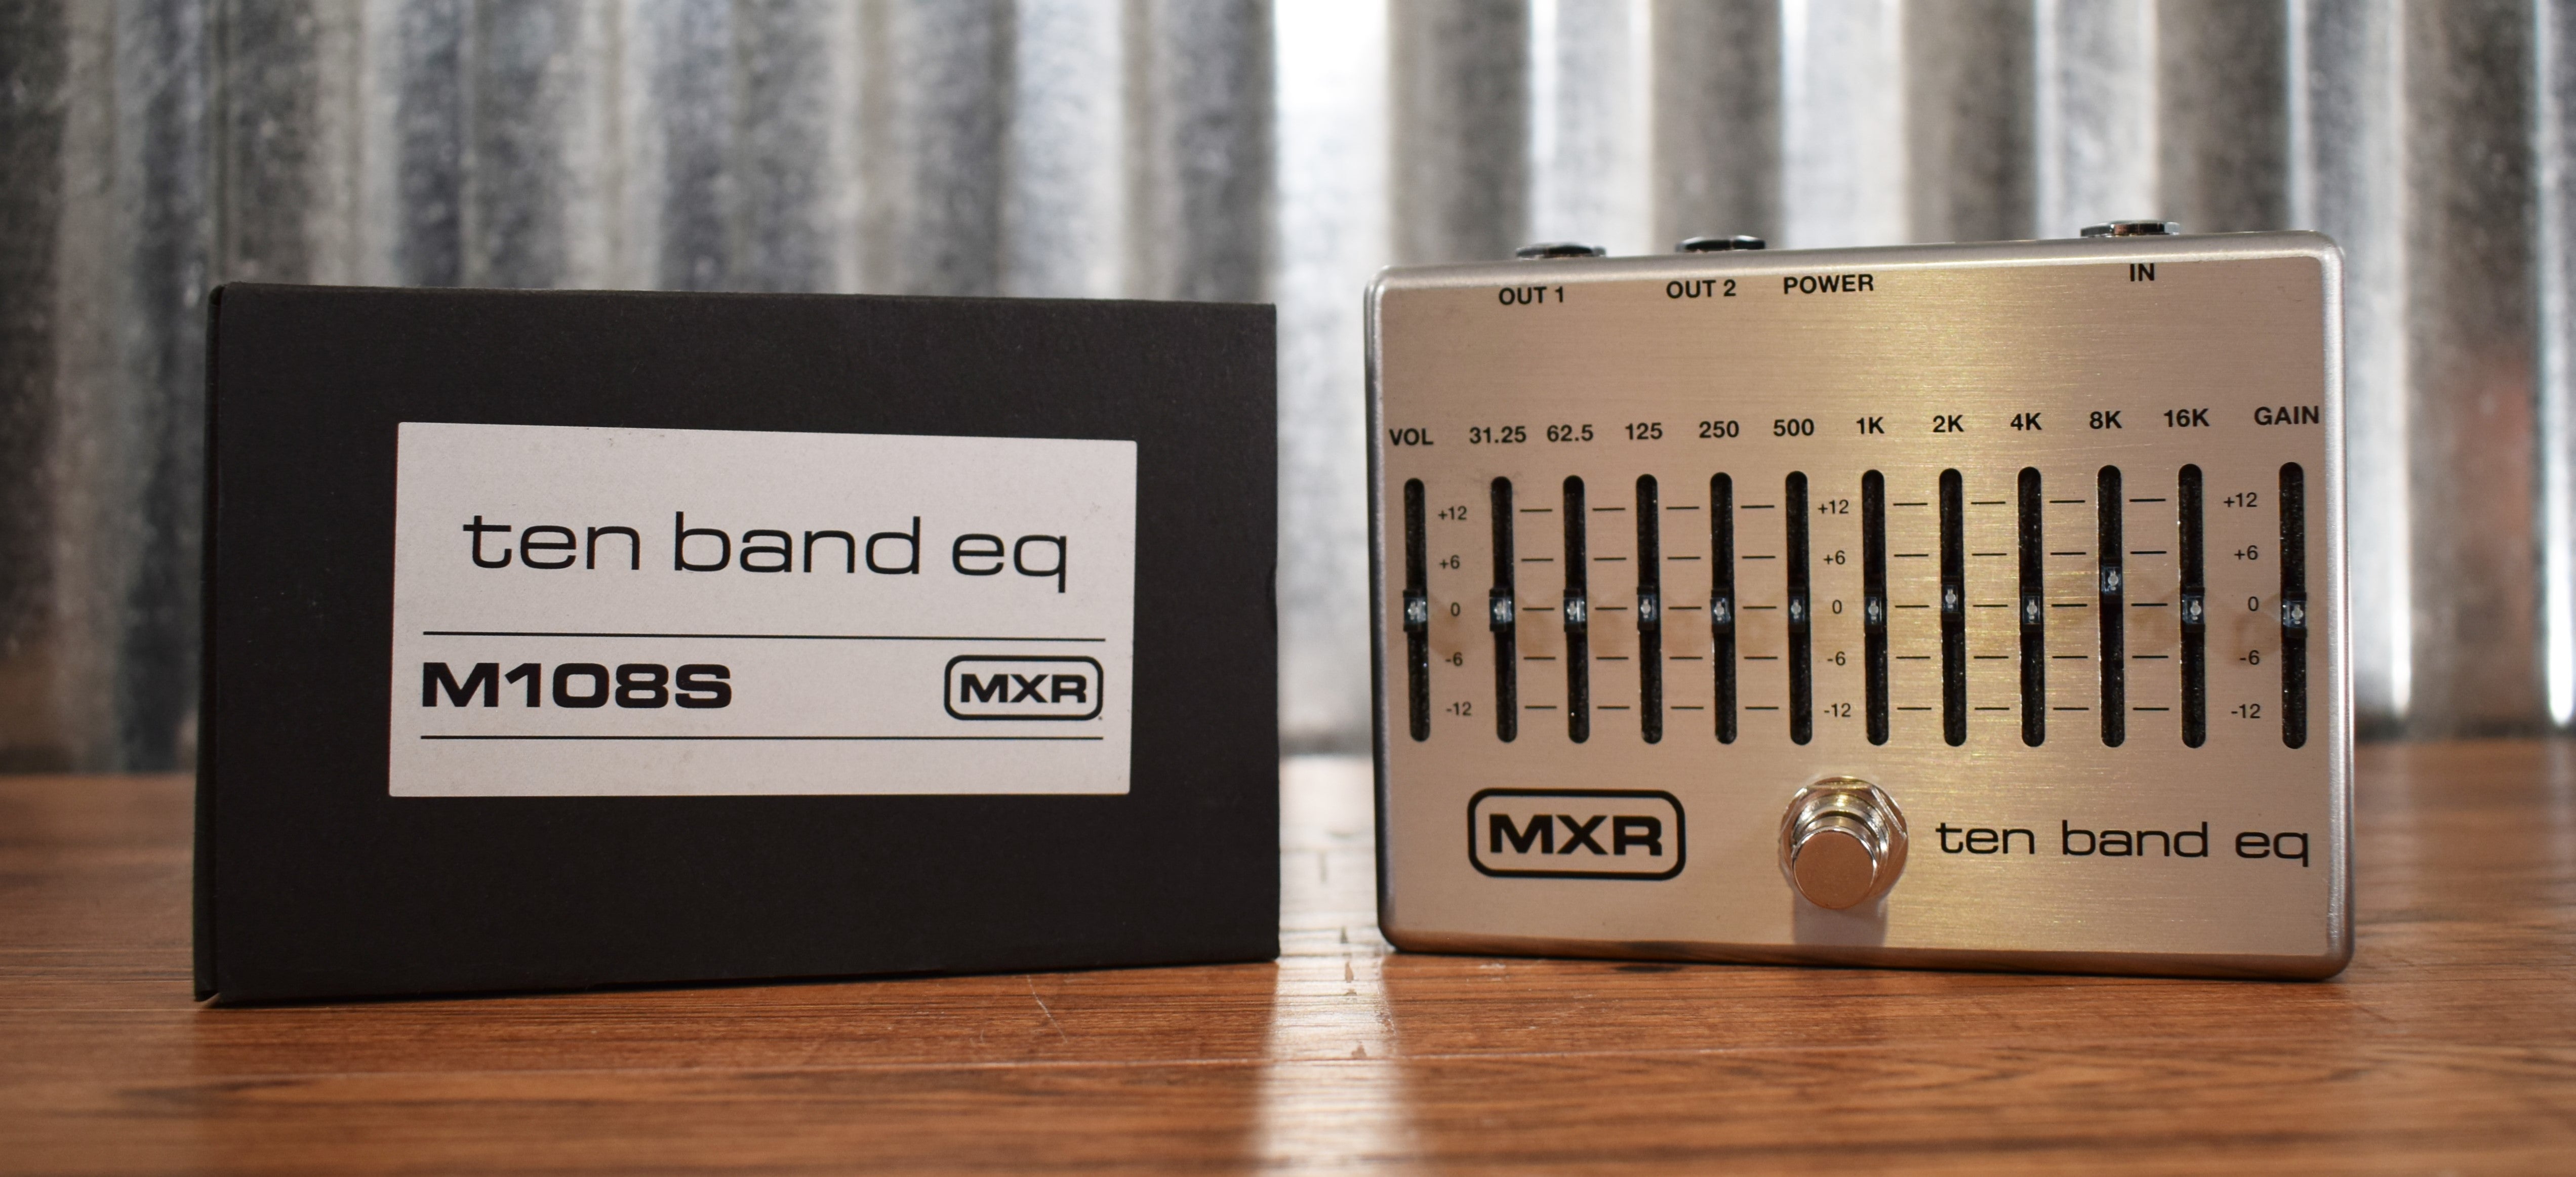 Dunlop MXR M108S 10 Band Graphic Equalizer & Power Supply Guitar